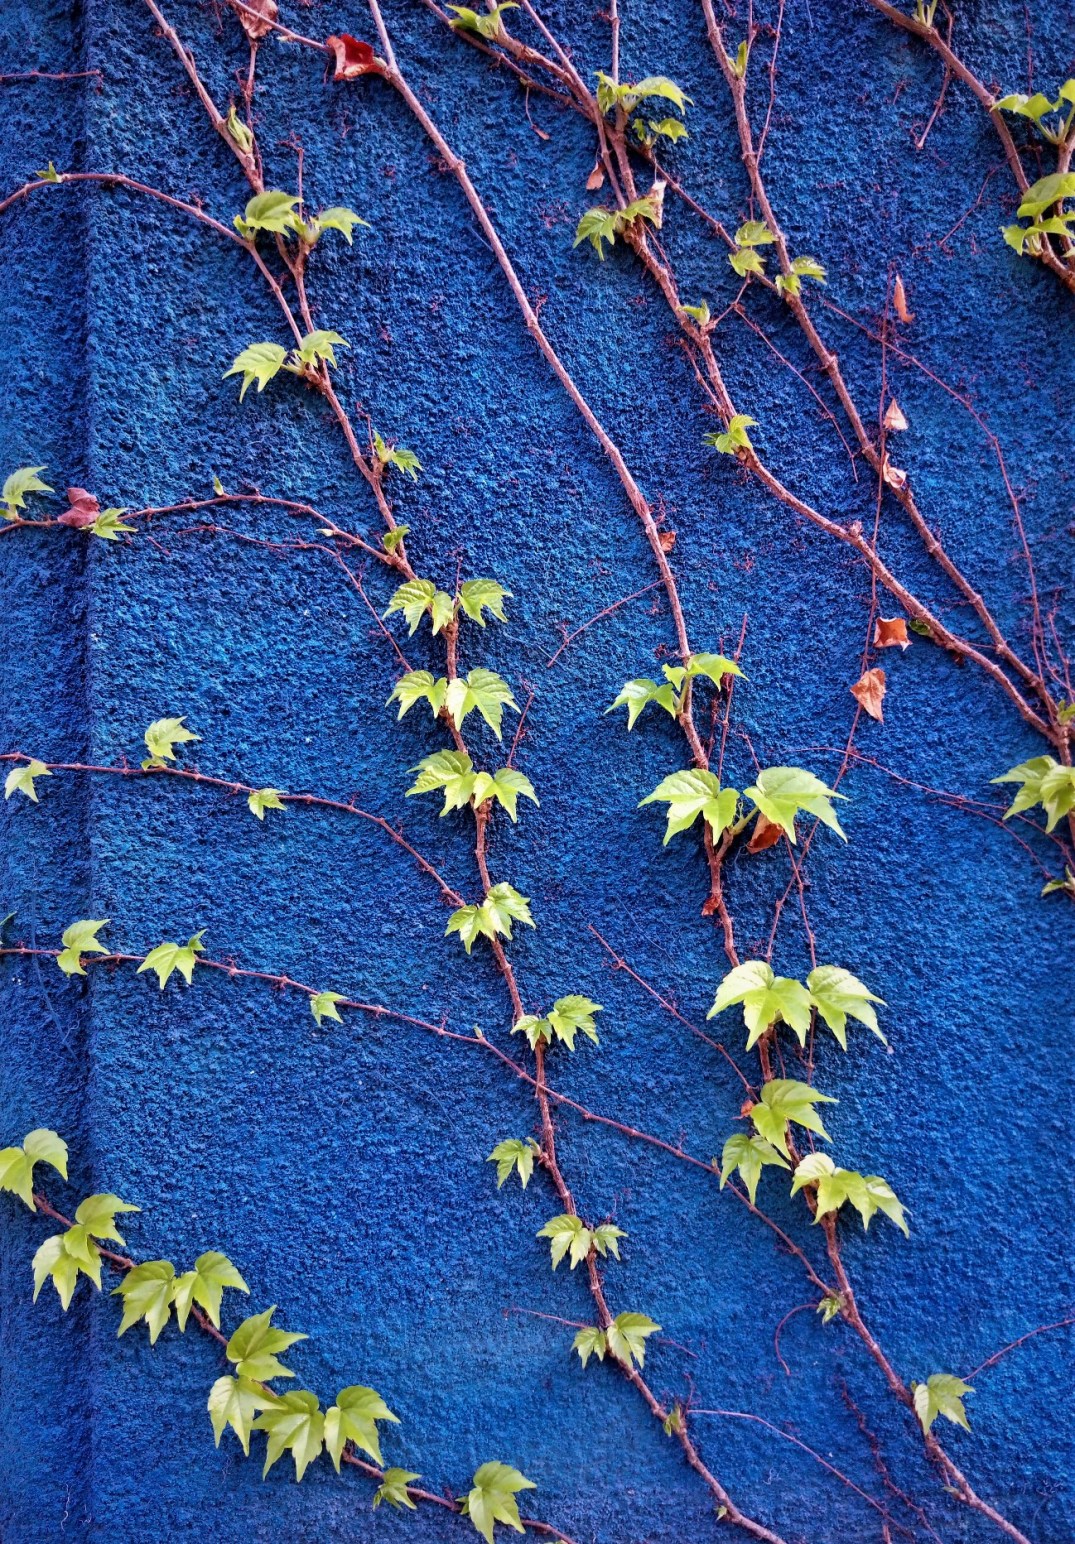 Ivy on the blue wall. ©Shorena Ratiani Photography